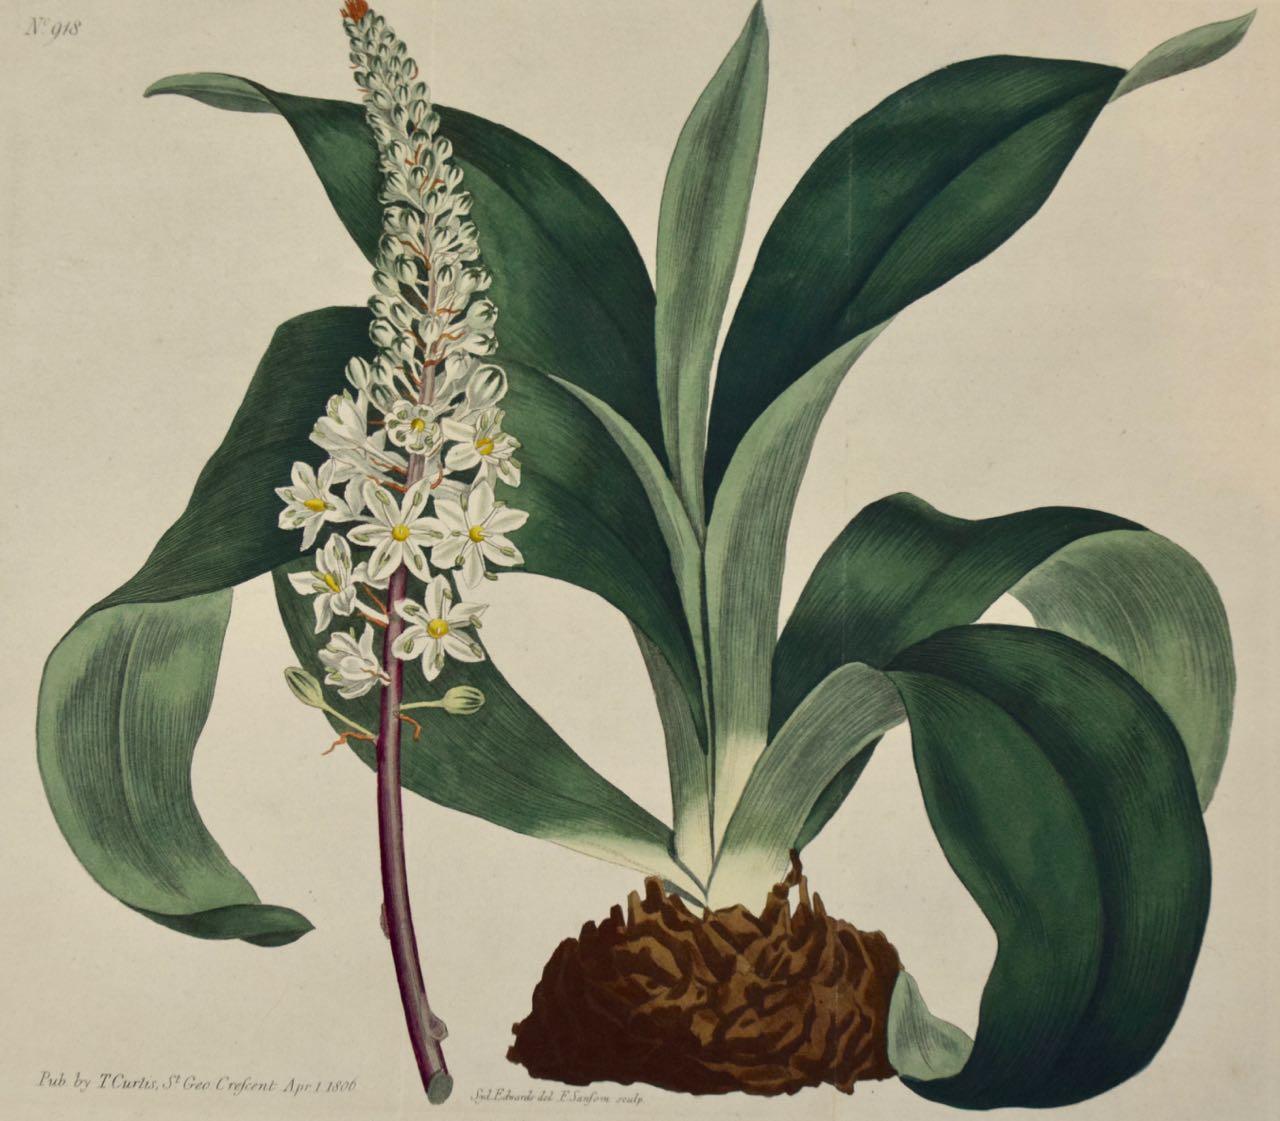 Flowering Sea Onion: A 19th Century Hand-colored Engraving by William Curtis